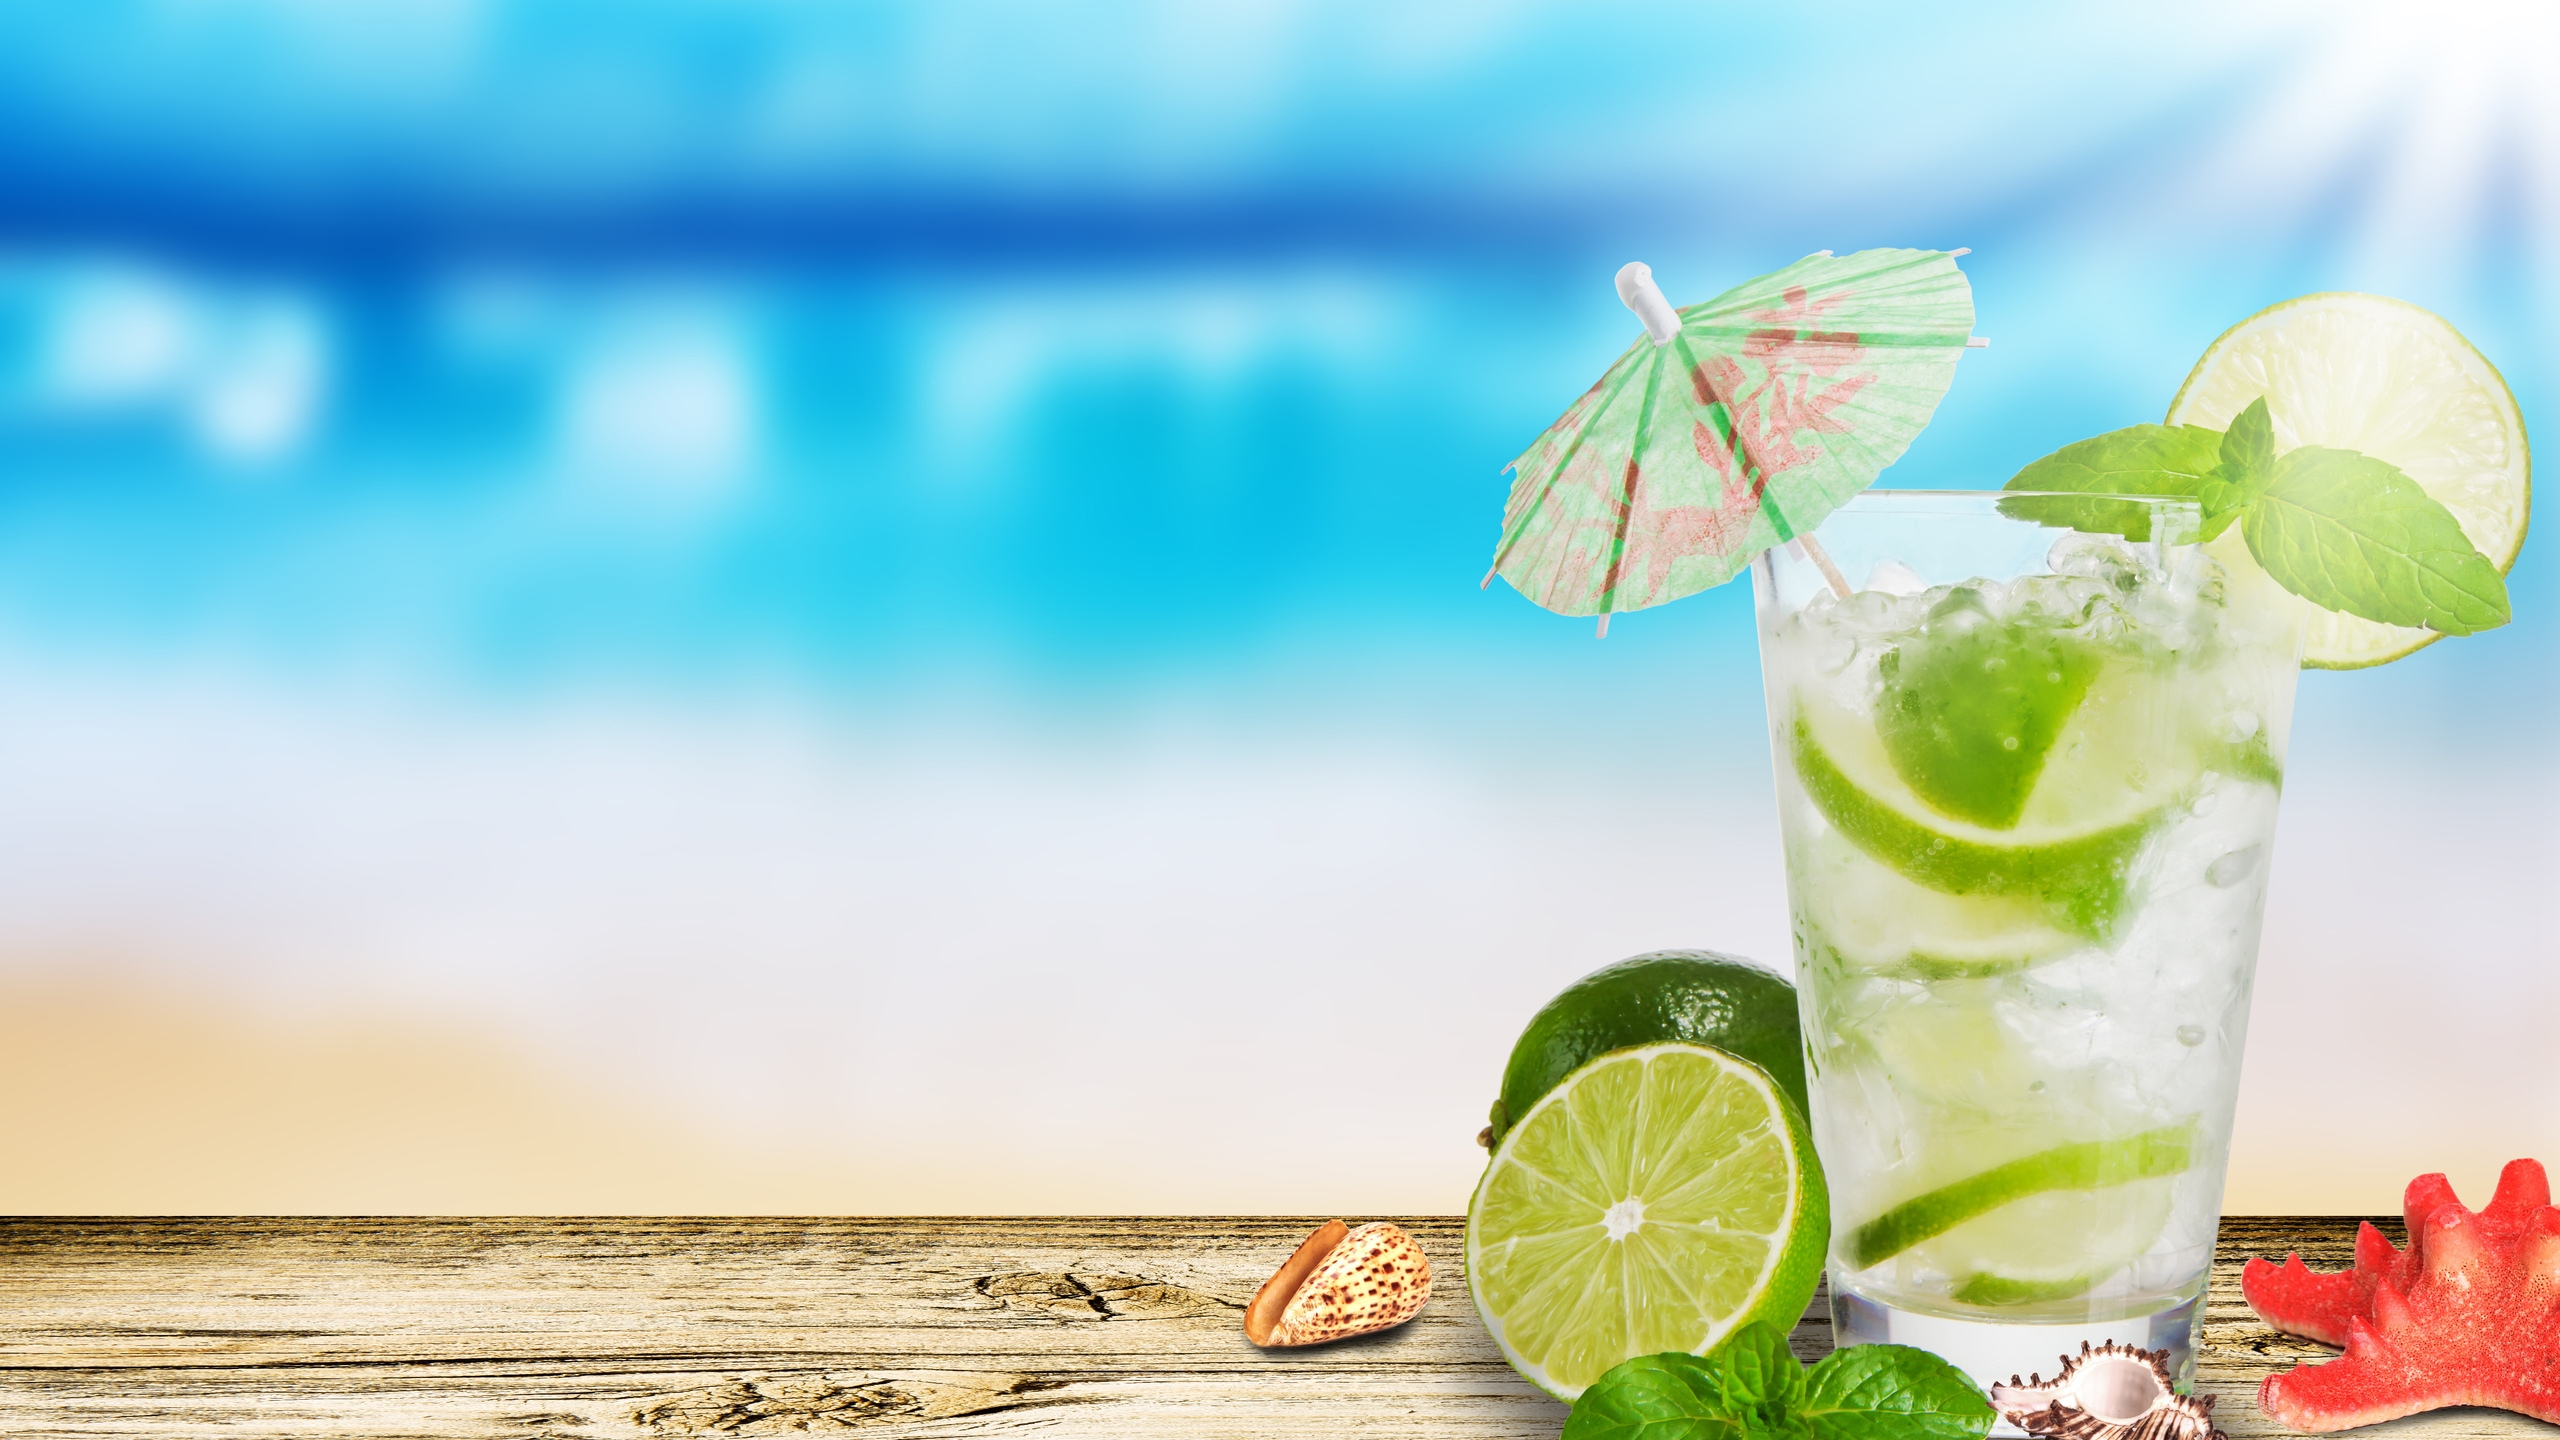 Mojito Cocktail for 2560x1440 HDTV resolution